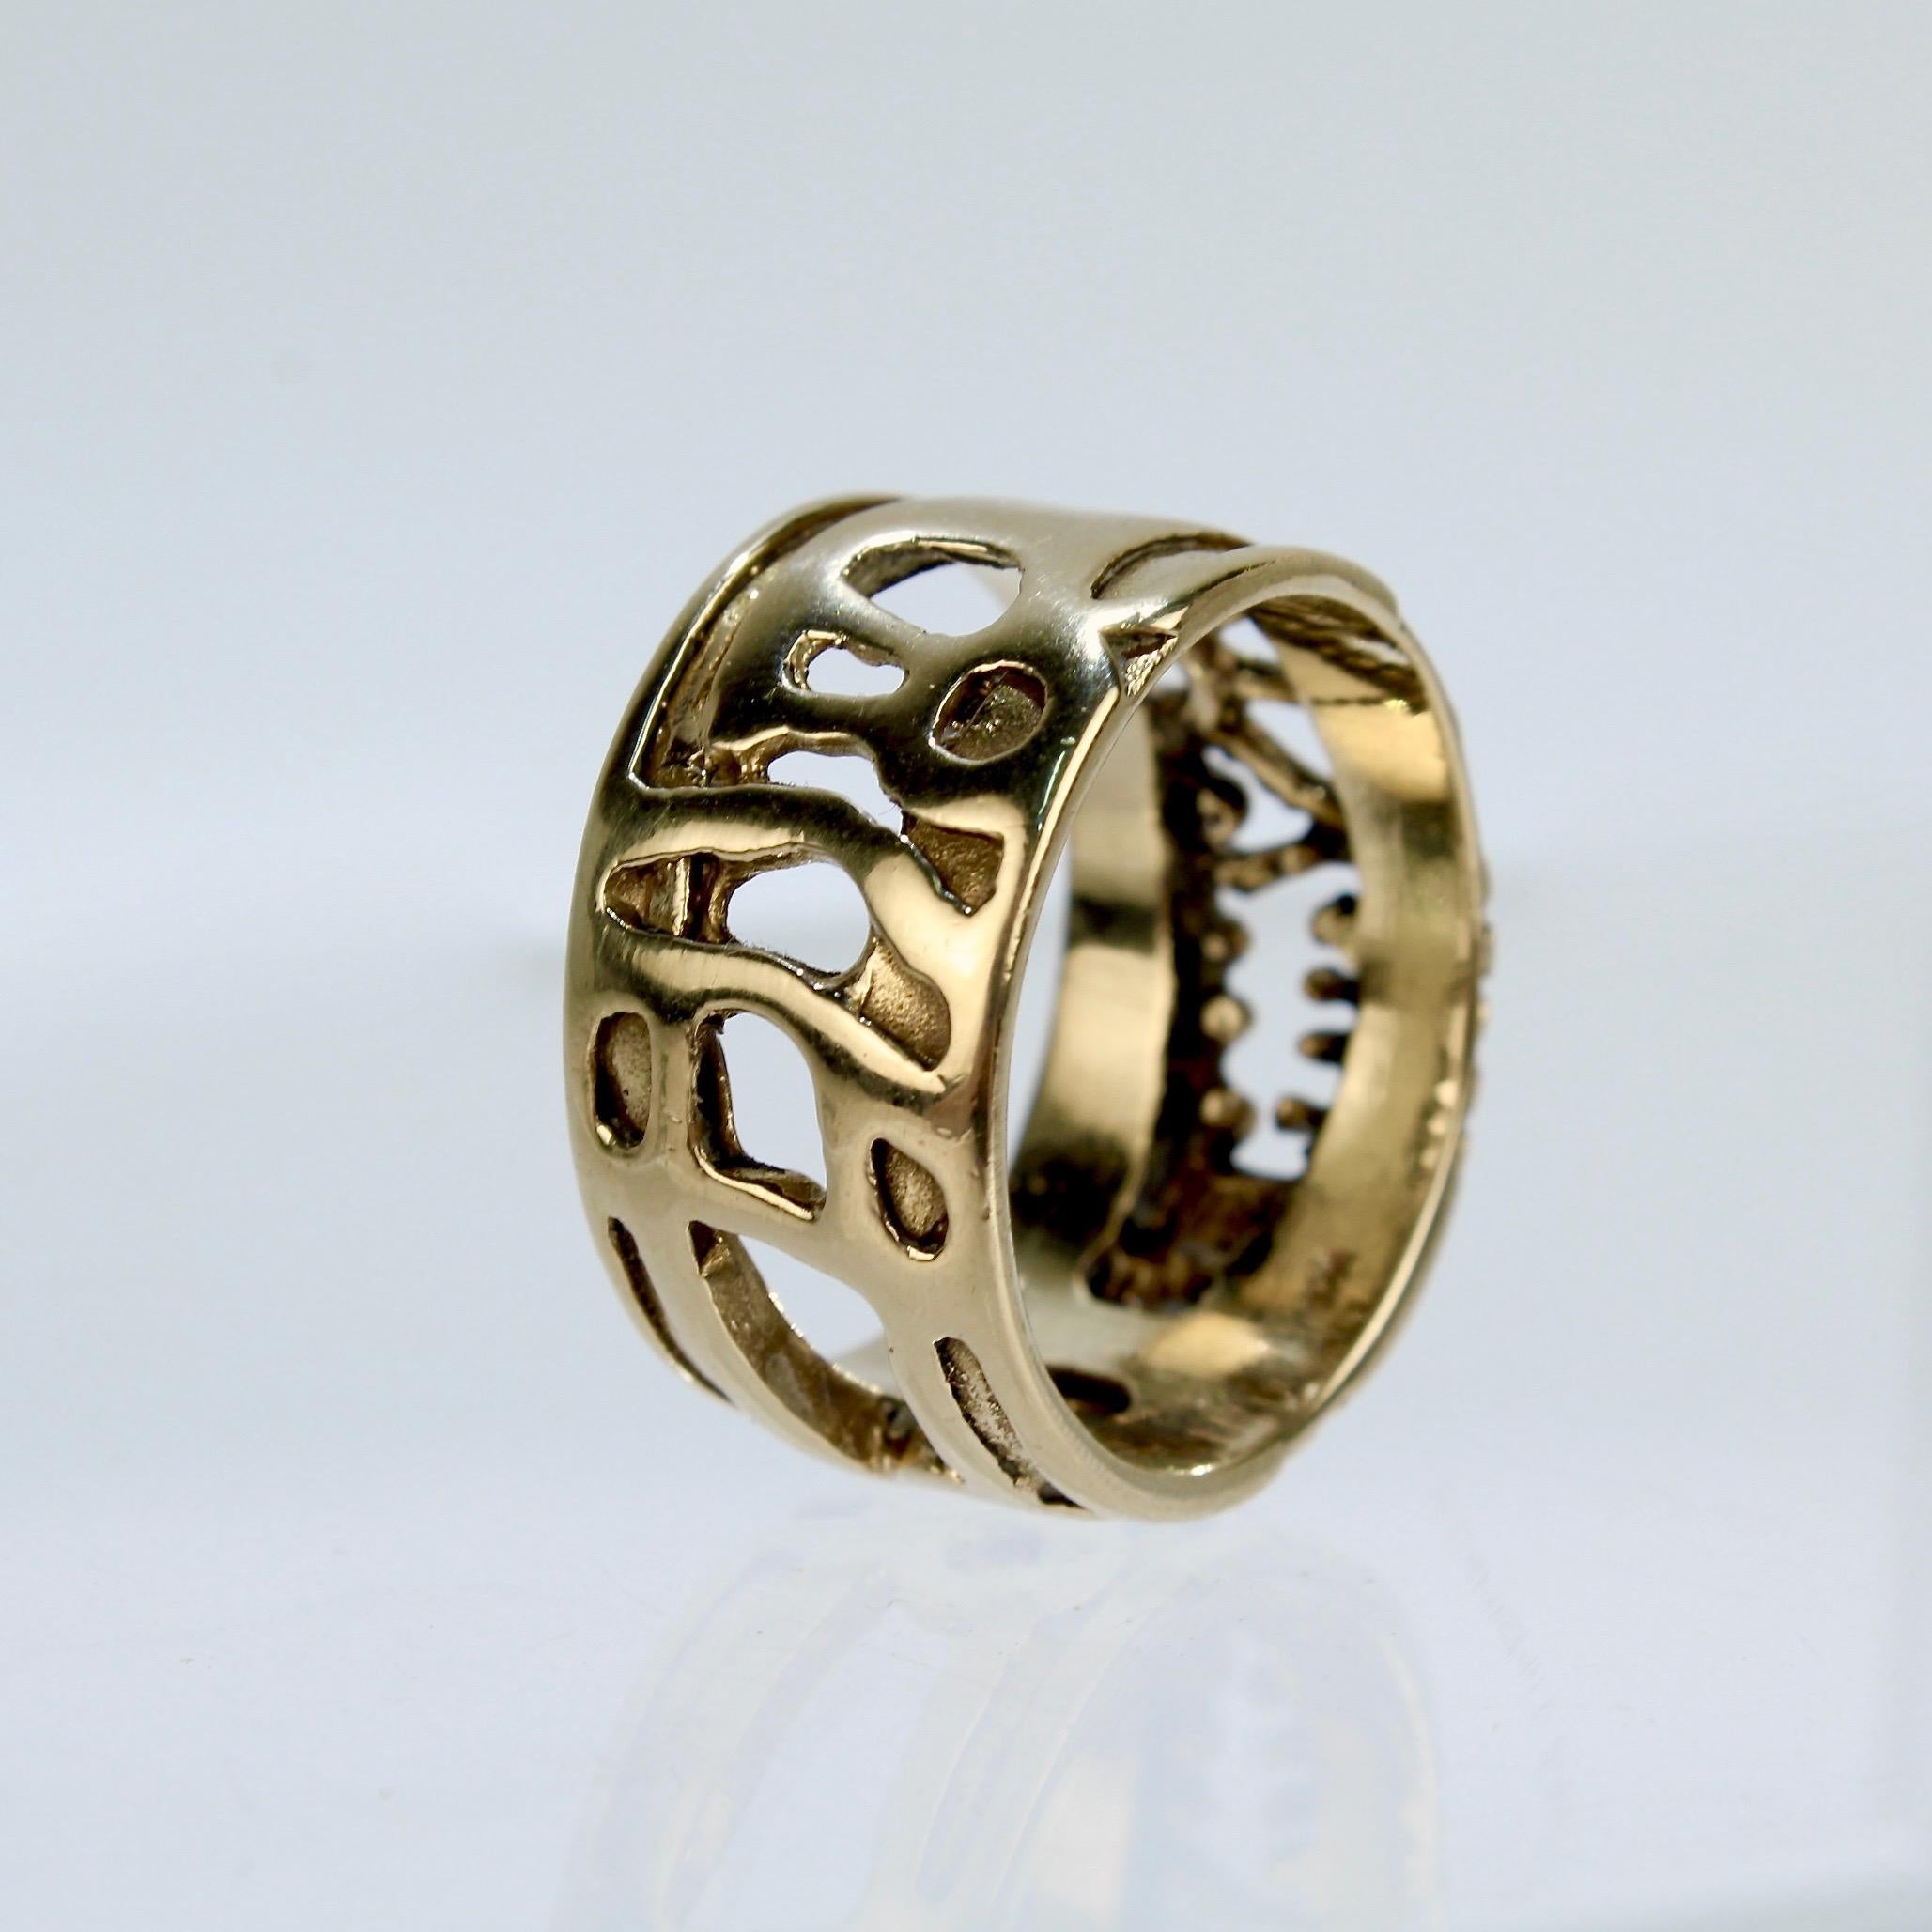 A fine Lee Peck band ring with openwork. 

Lee Barnes Peck was a distinguished Professor of Metal and Jewelry at Northern Illinois for decades. His work is held in important public and private collections.  

Stamped 14K and PECK to the shank. 

